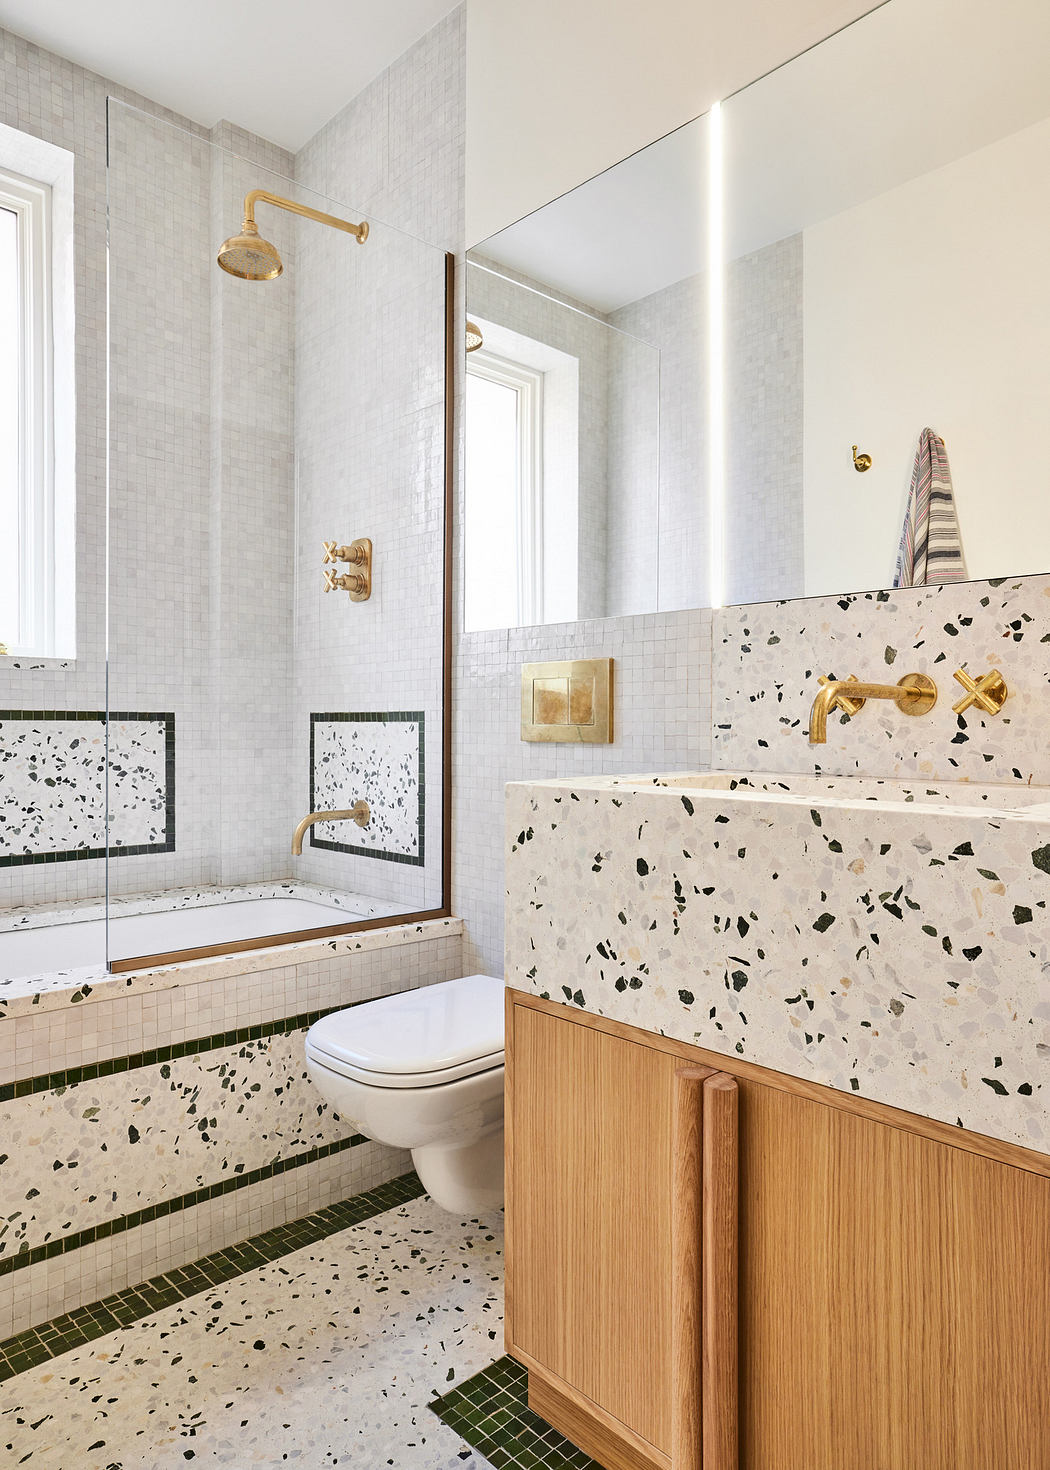 Modern bathroom with terrazzo tiles and wooden cabinetry.